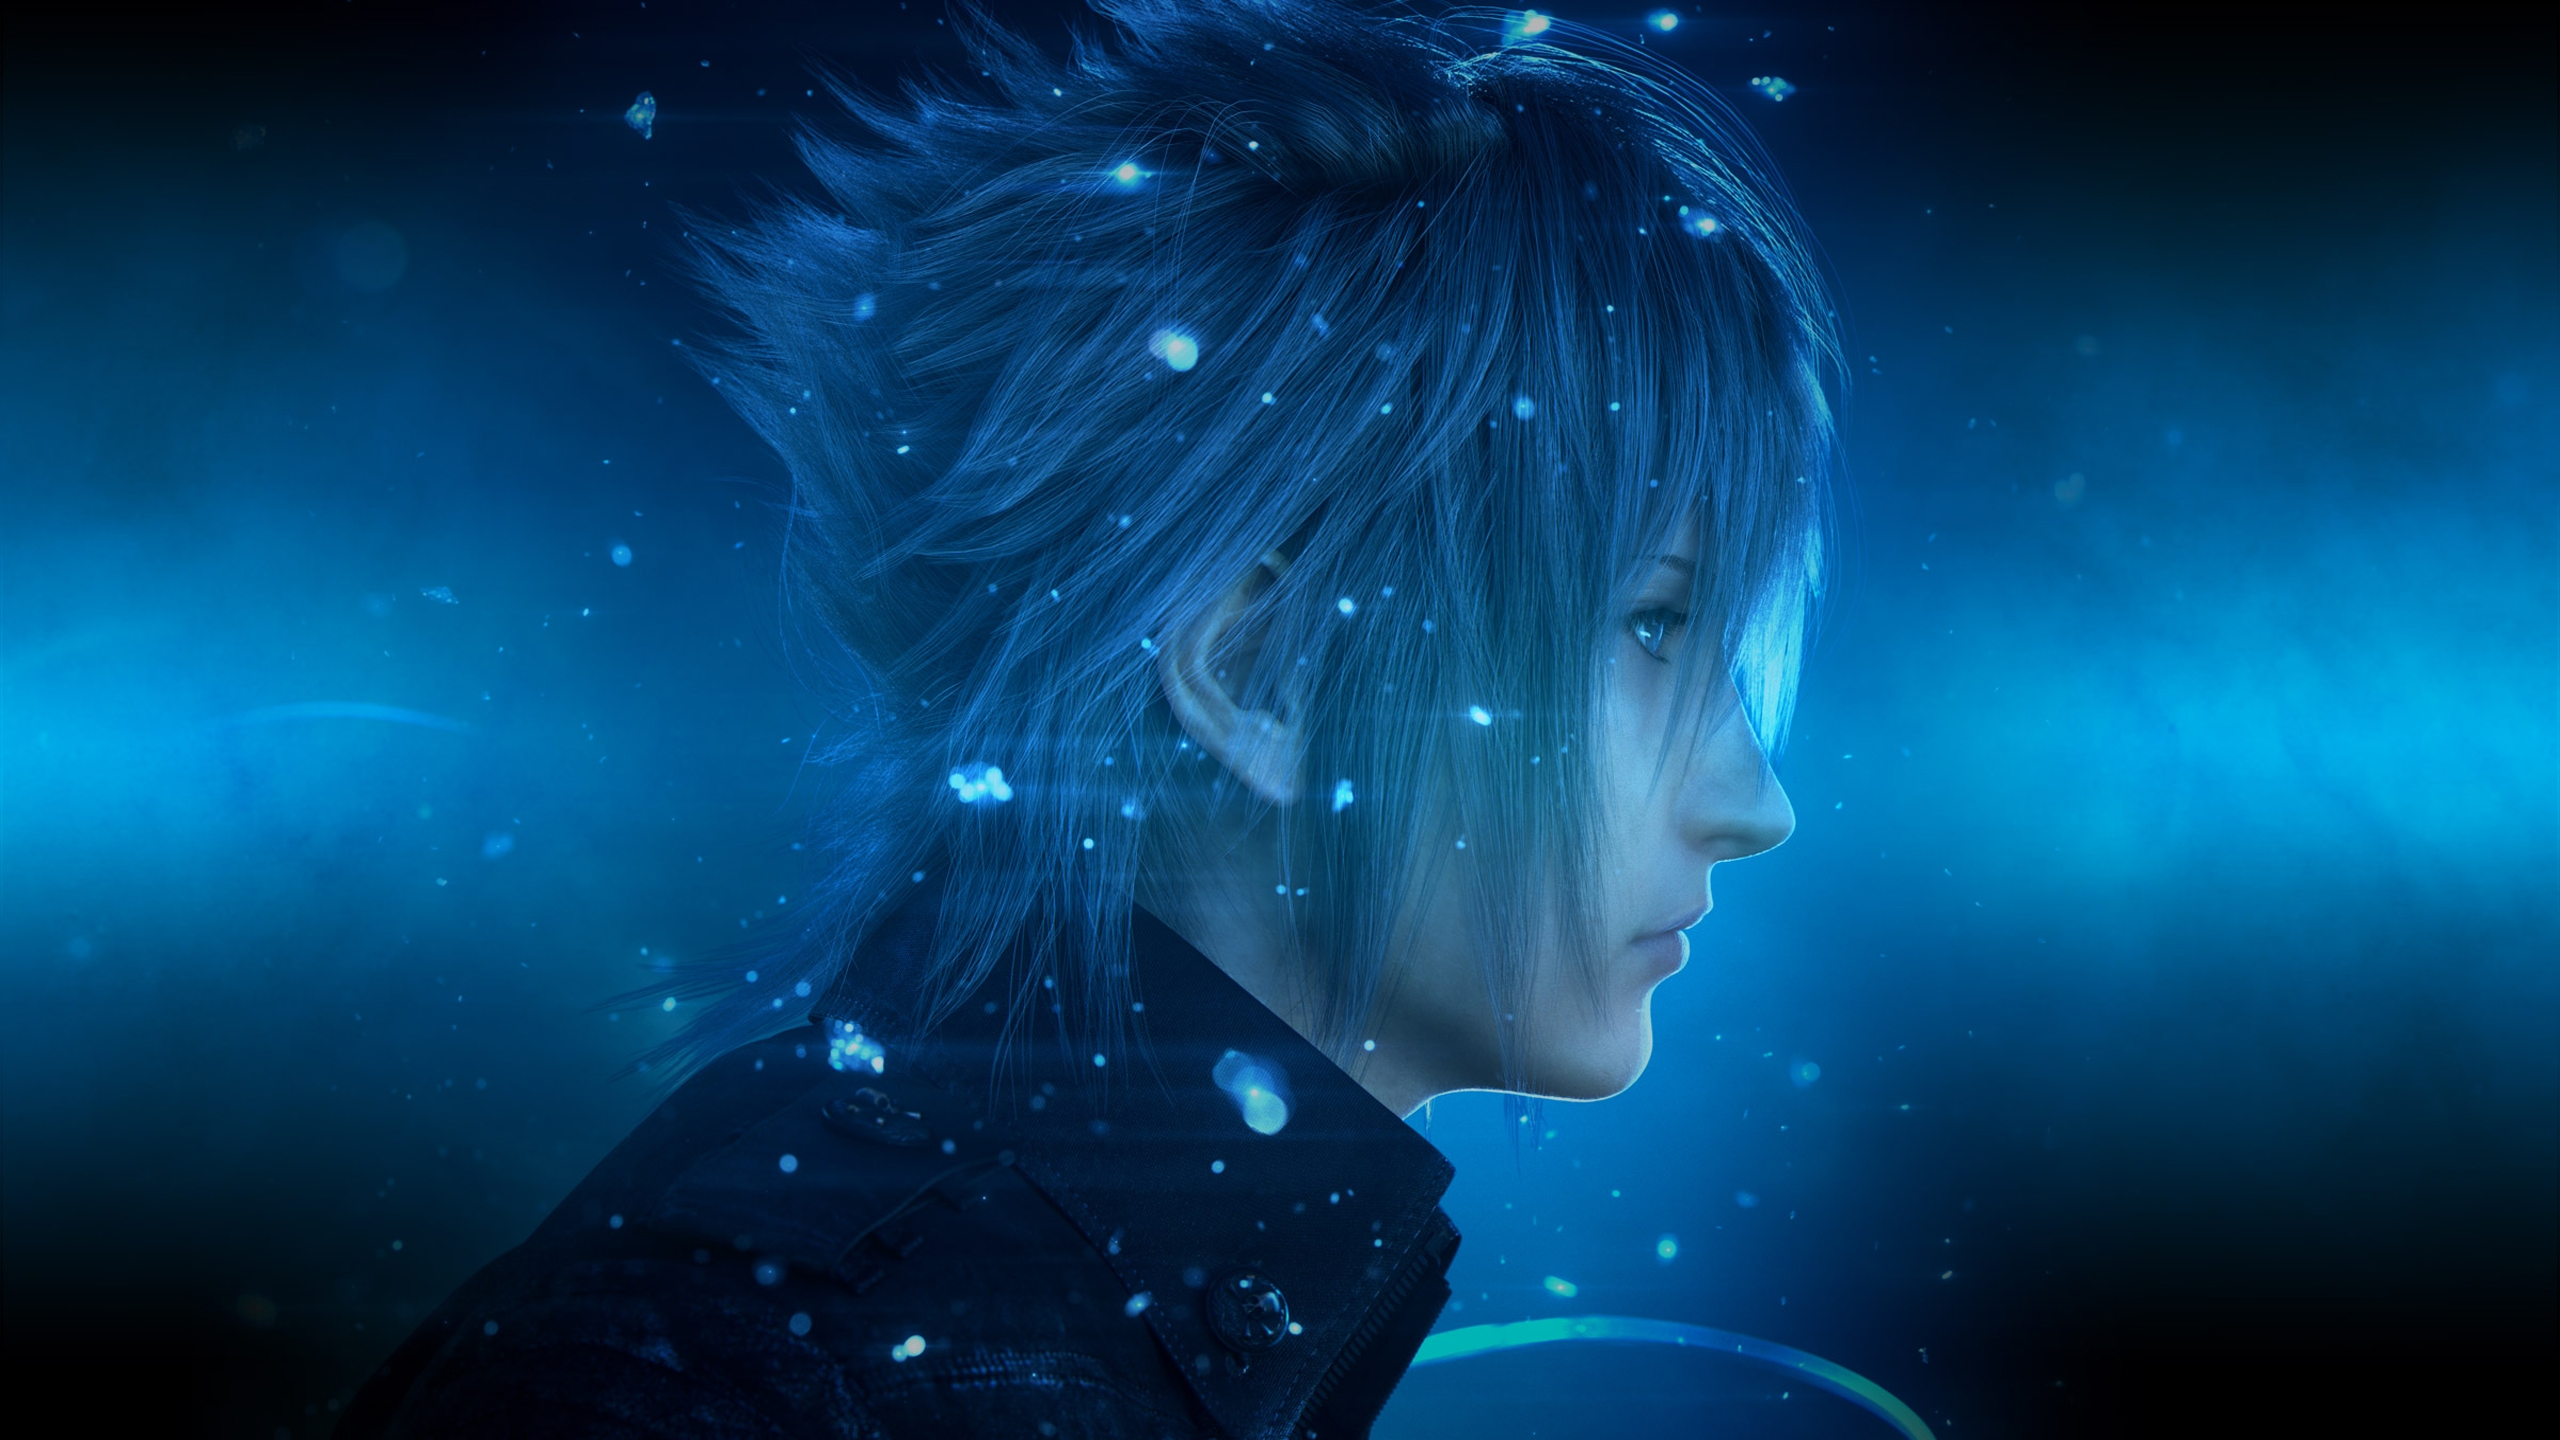 Final Fantasy XV Collaboration Arrives in War of the Visions - Siliconera